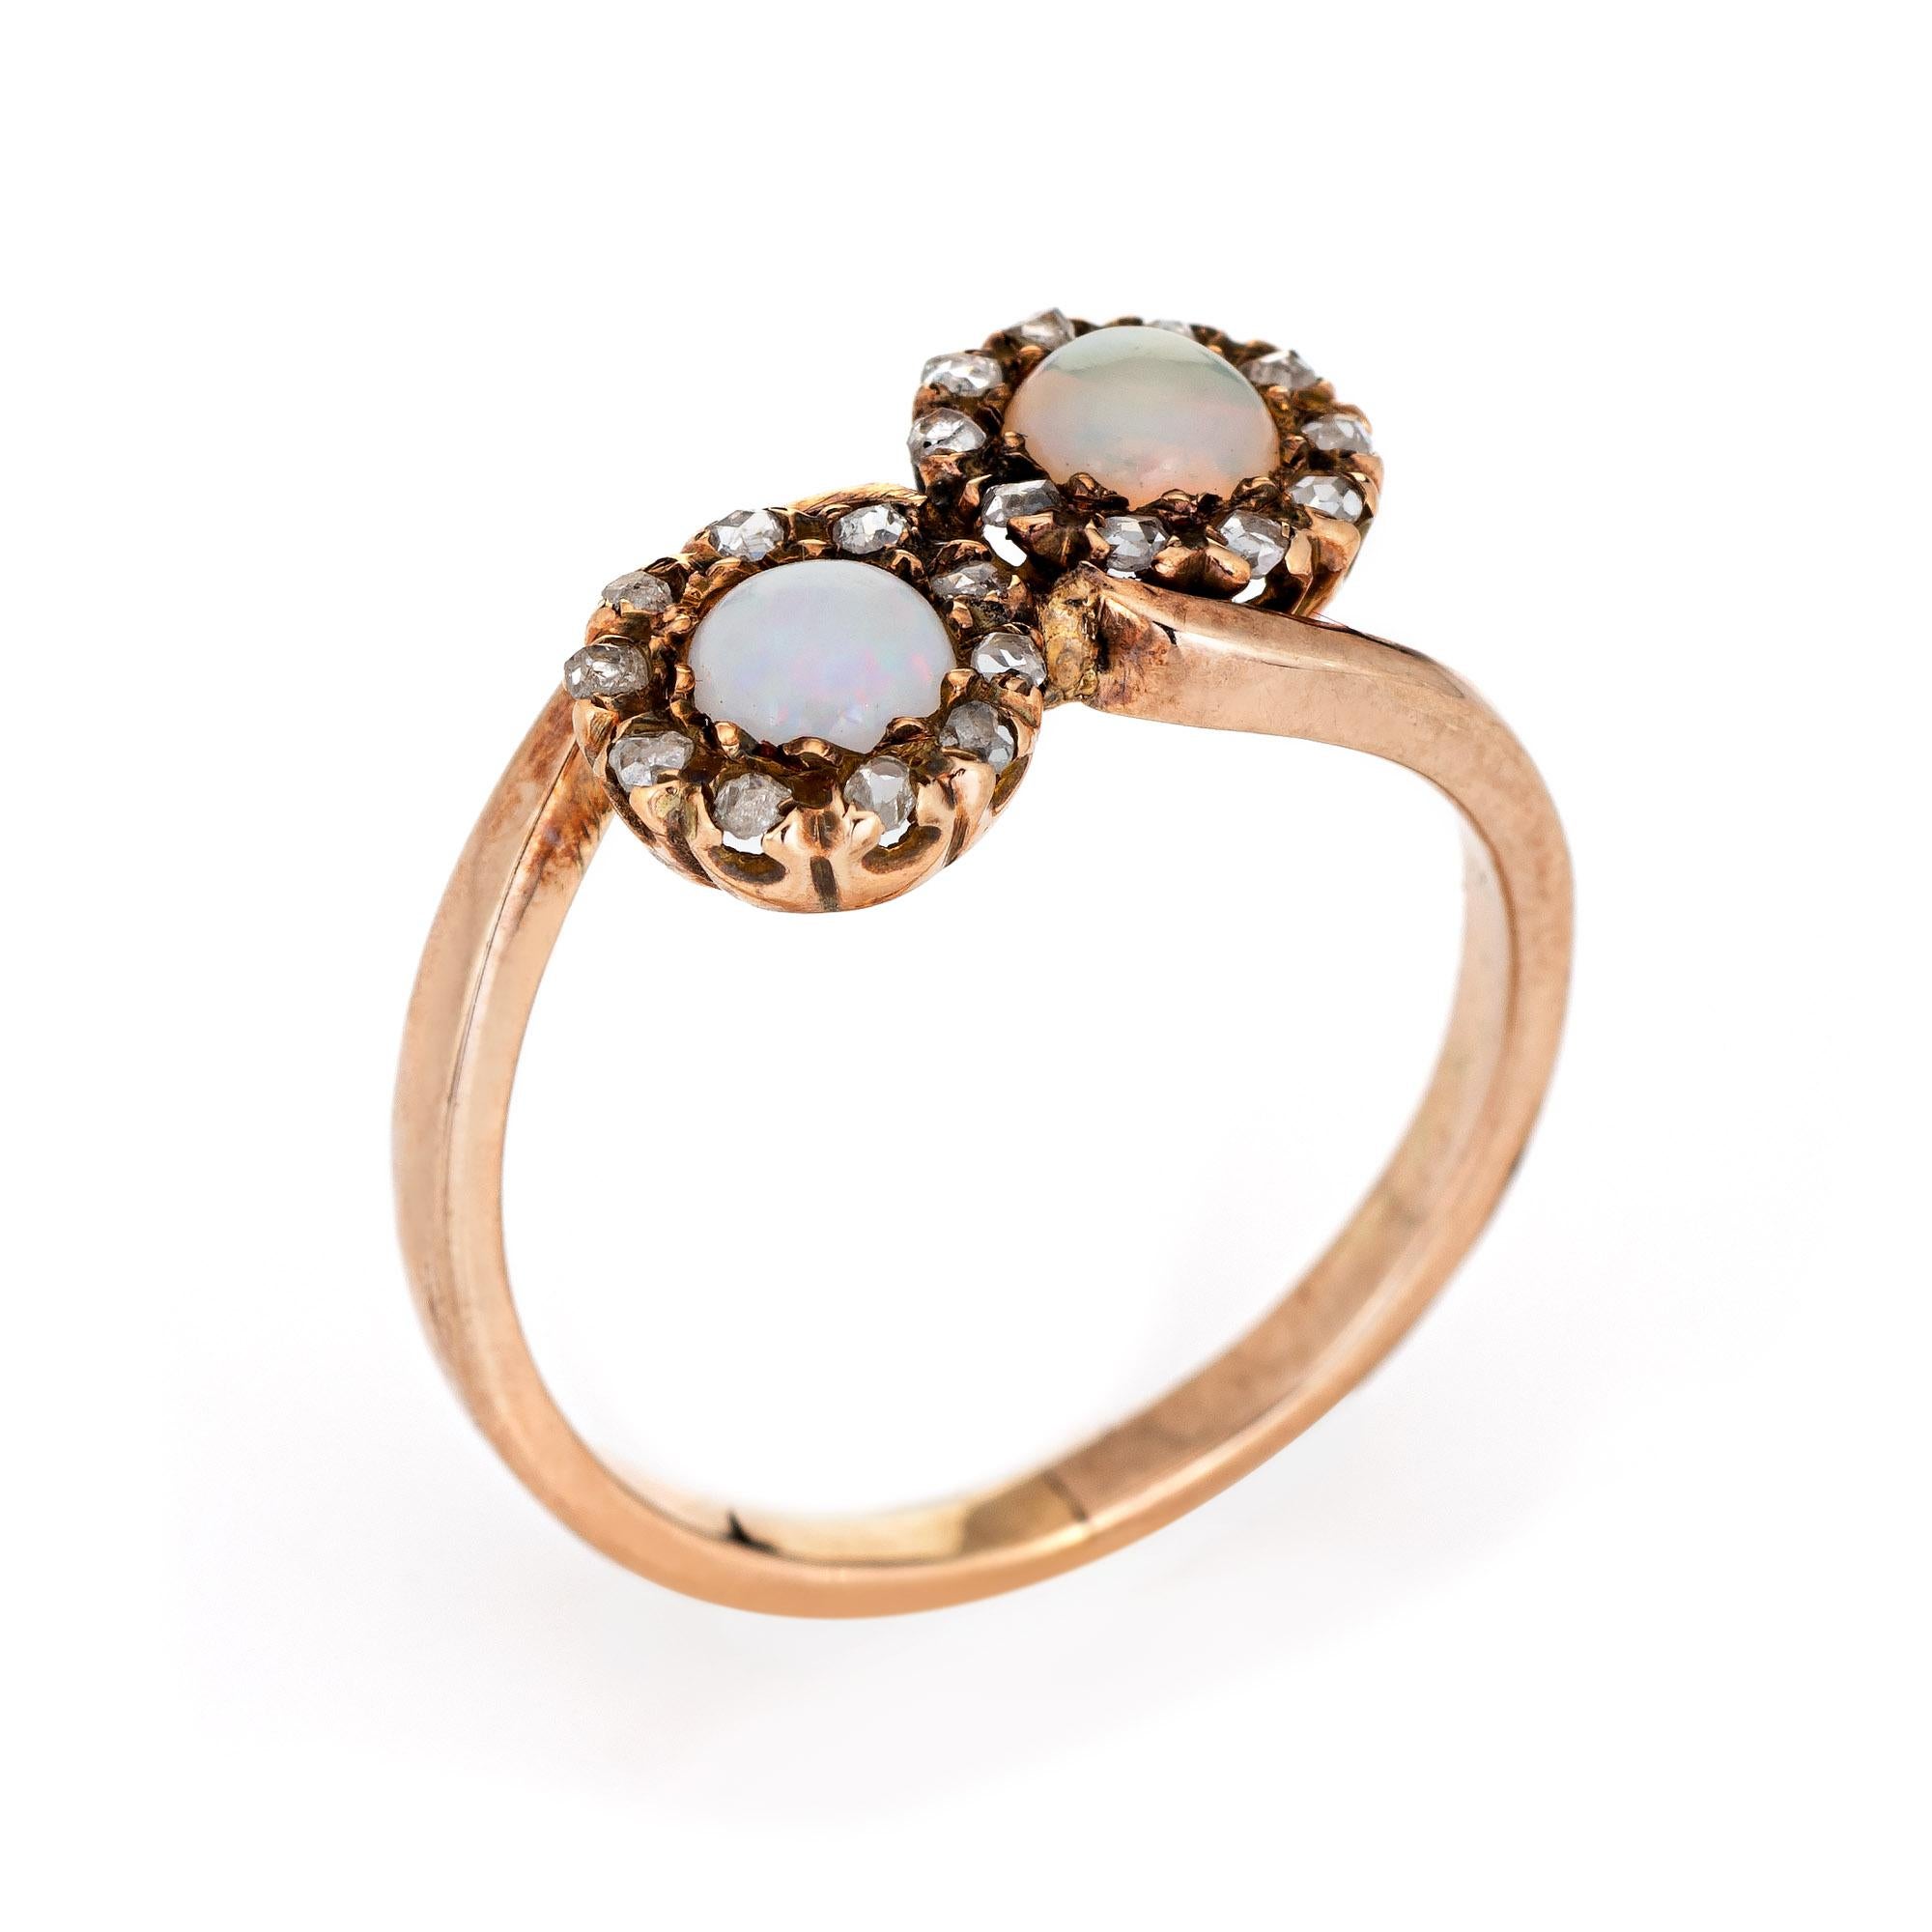 Finely detailed antique Victorian opal & diamond 'moi et toi' ring crafted in 10k yellow gold (circa 1880s to 1990s).  

Two opals each measure 5mm, accented with 20 estimated 0.01 carat old rose cut diamonds. The diamonds total an estimated 0.20